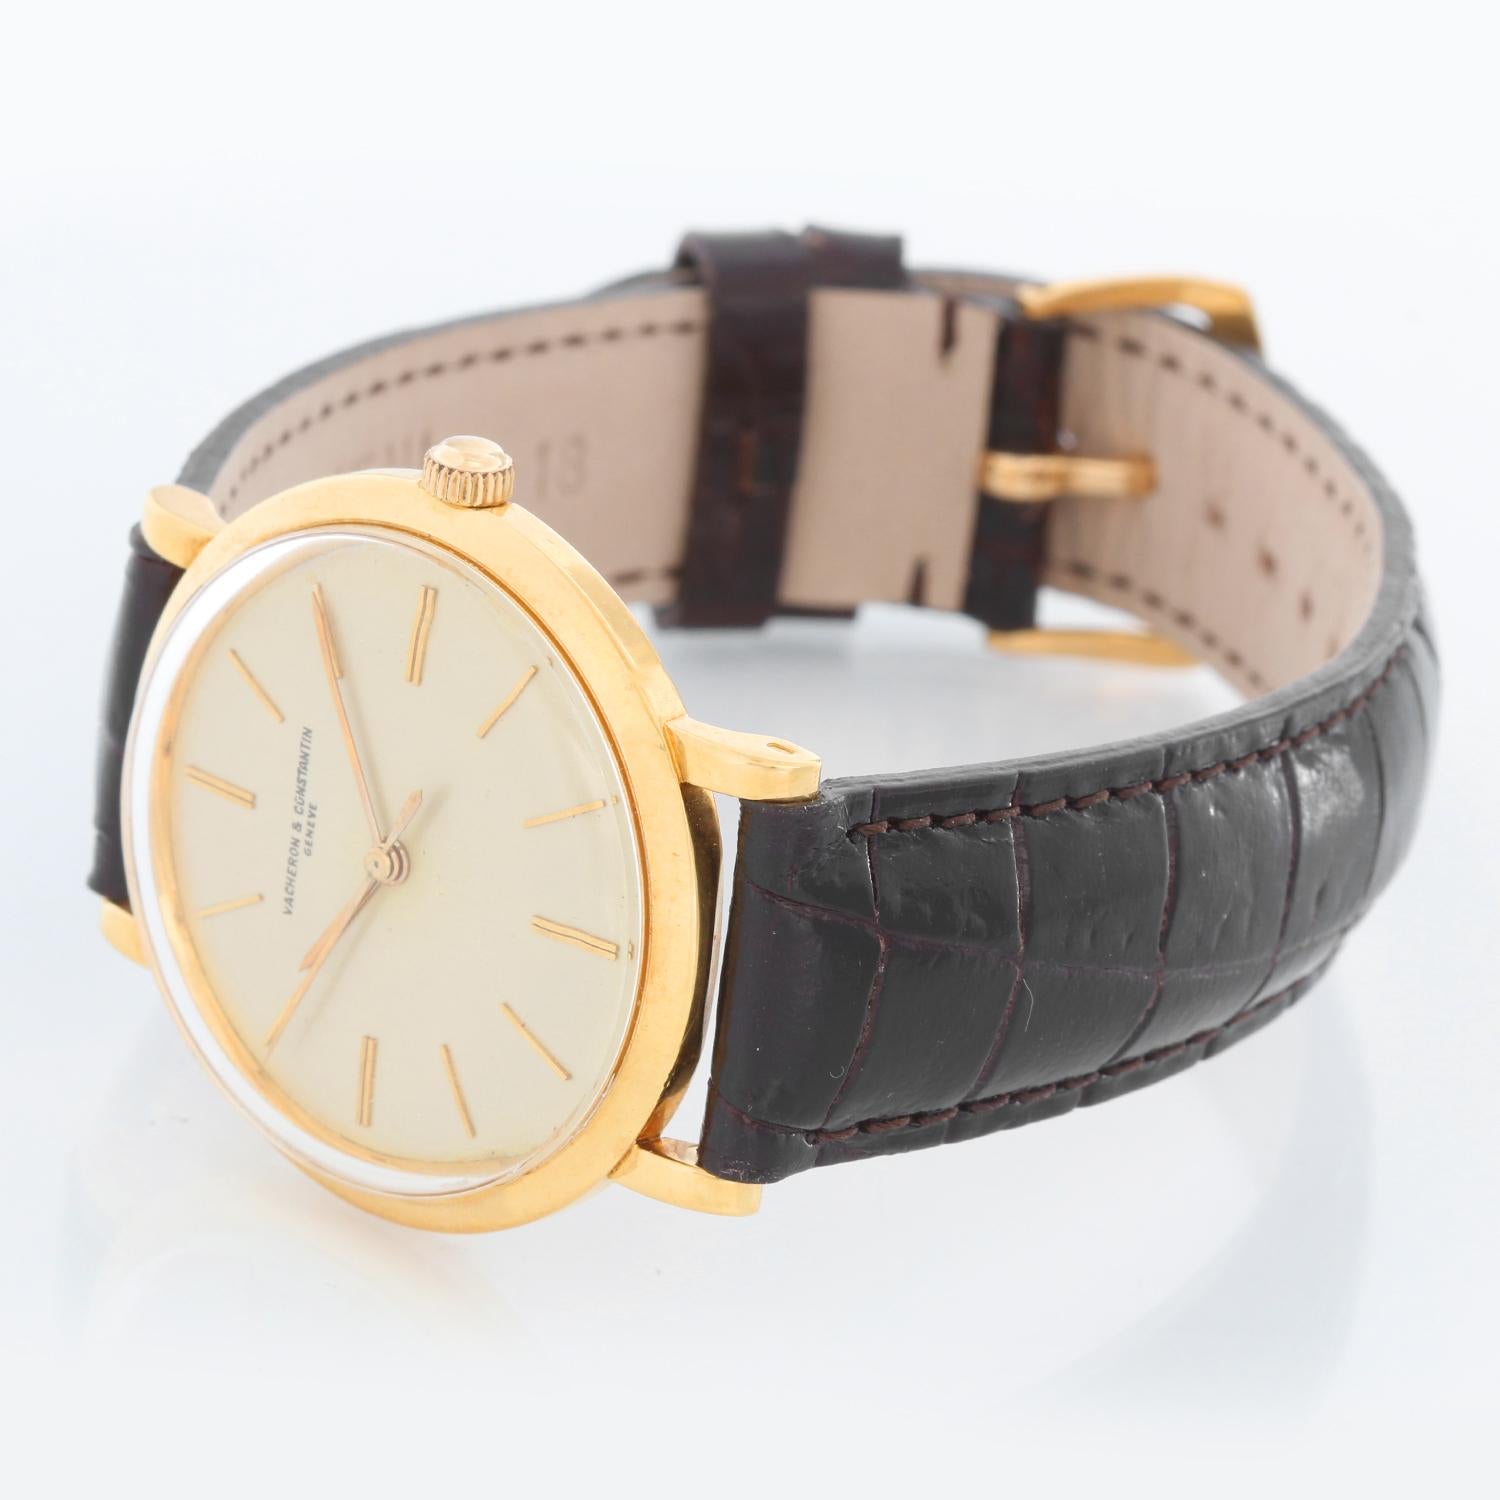 Vacheron Constantin 18K Yellow Gold Men's Manual  Watch - Manual winding. Yellow Gold case ( 34 mm ). Silver dial with stick hour markers. Brown strap band with 18K Yellow gold tang buckle . Pre-owned with original decorated leather box, certificate